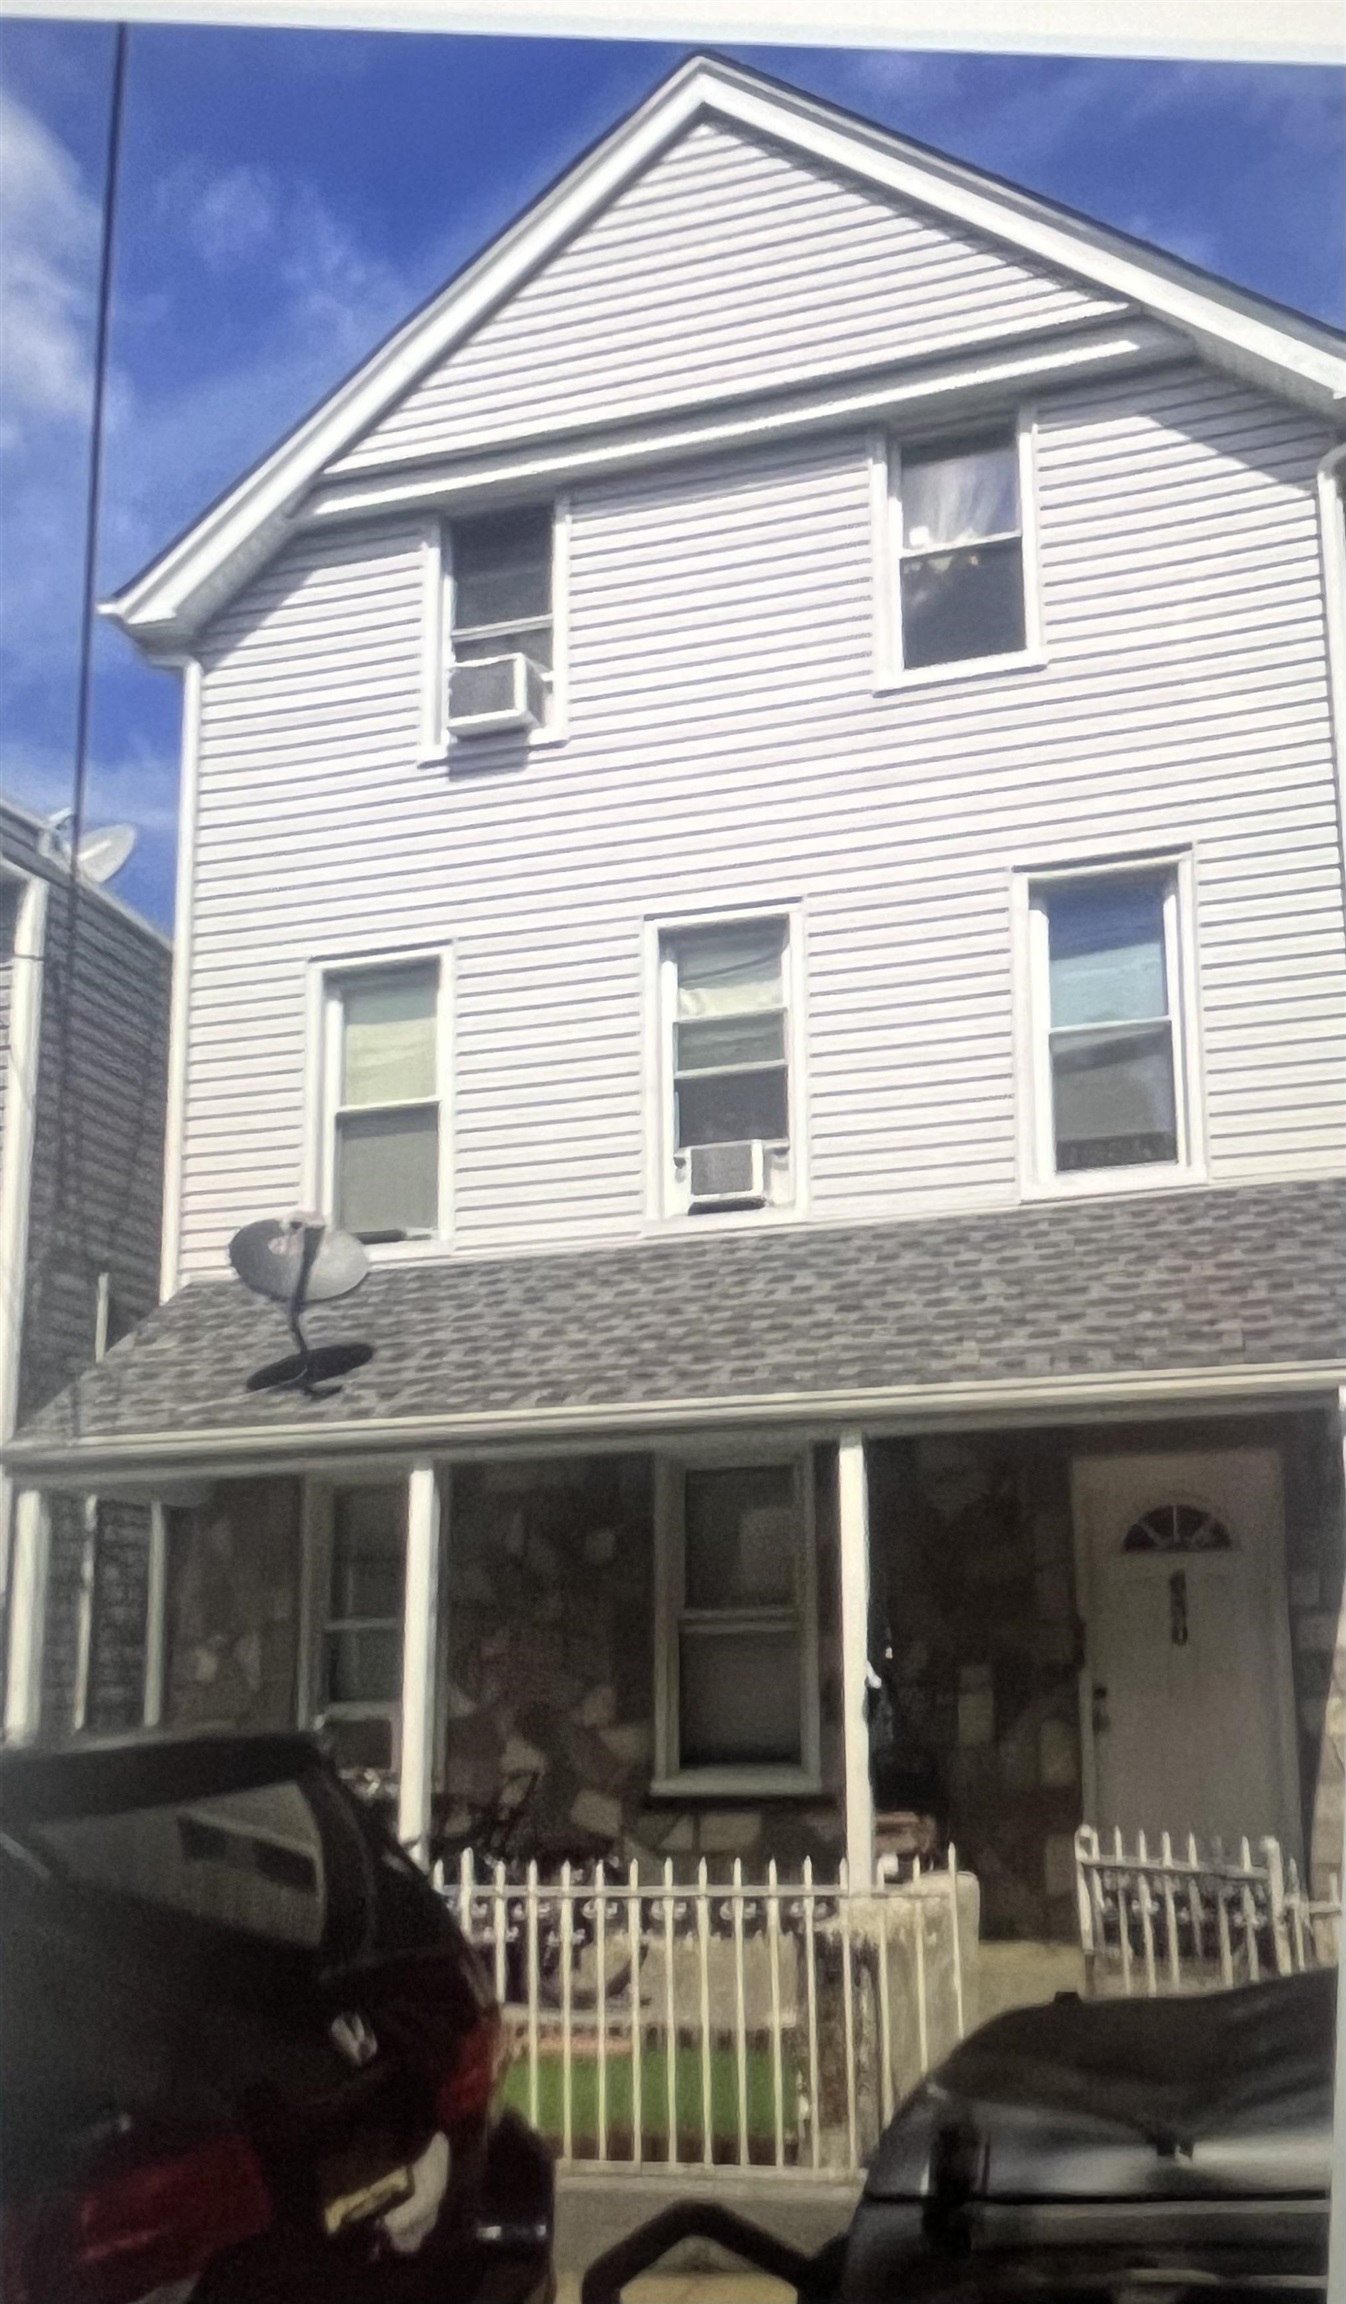 # 240000698 - For Rent in Union City NJ